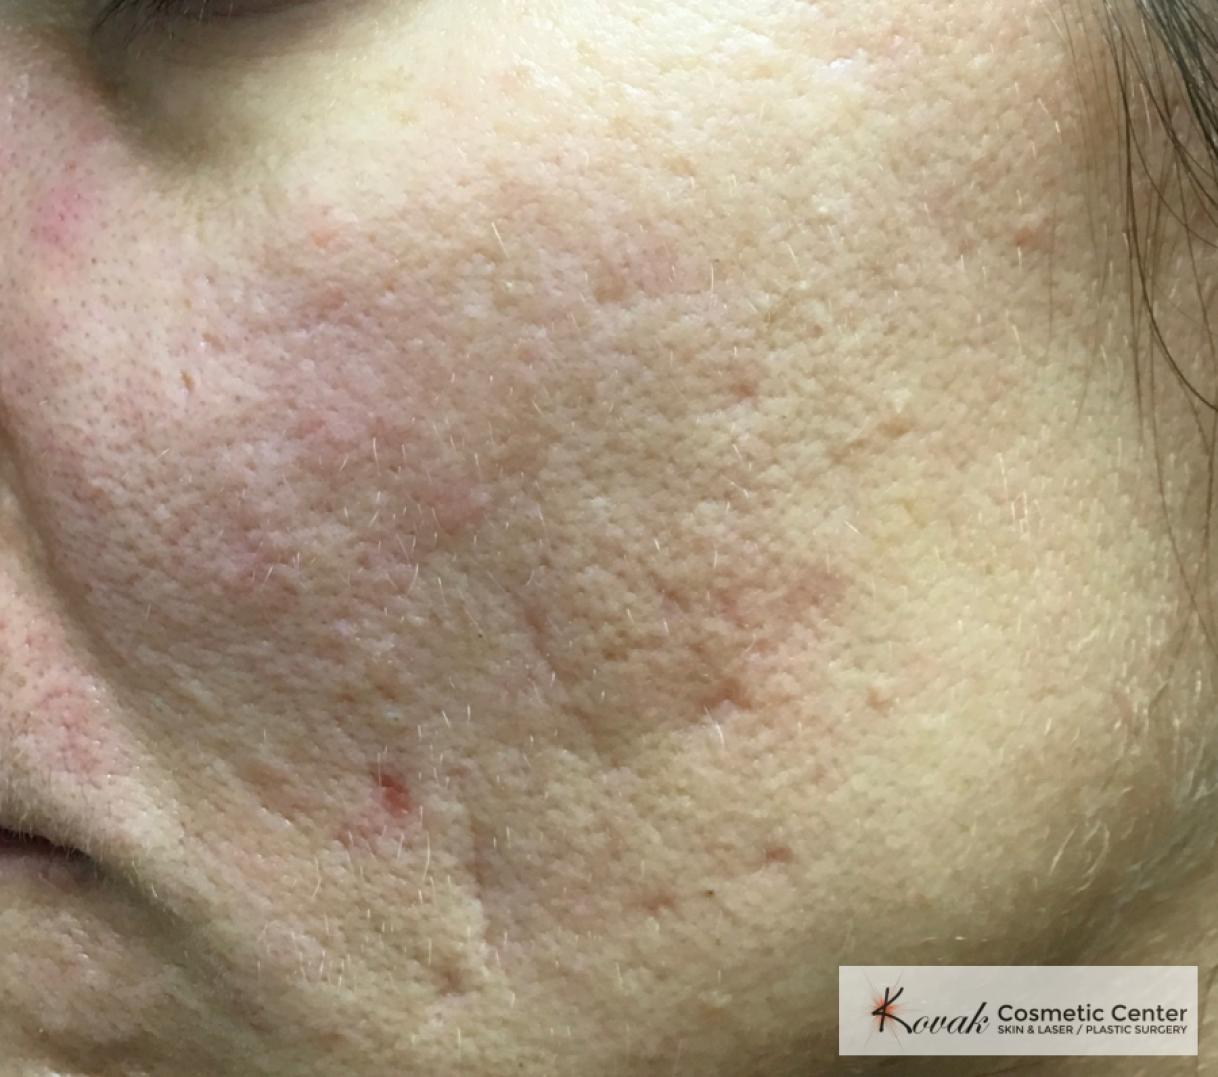 Acne Scars treated with Venus Viva on 35 year old woman - Before 